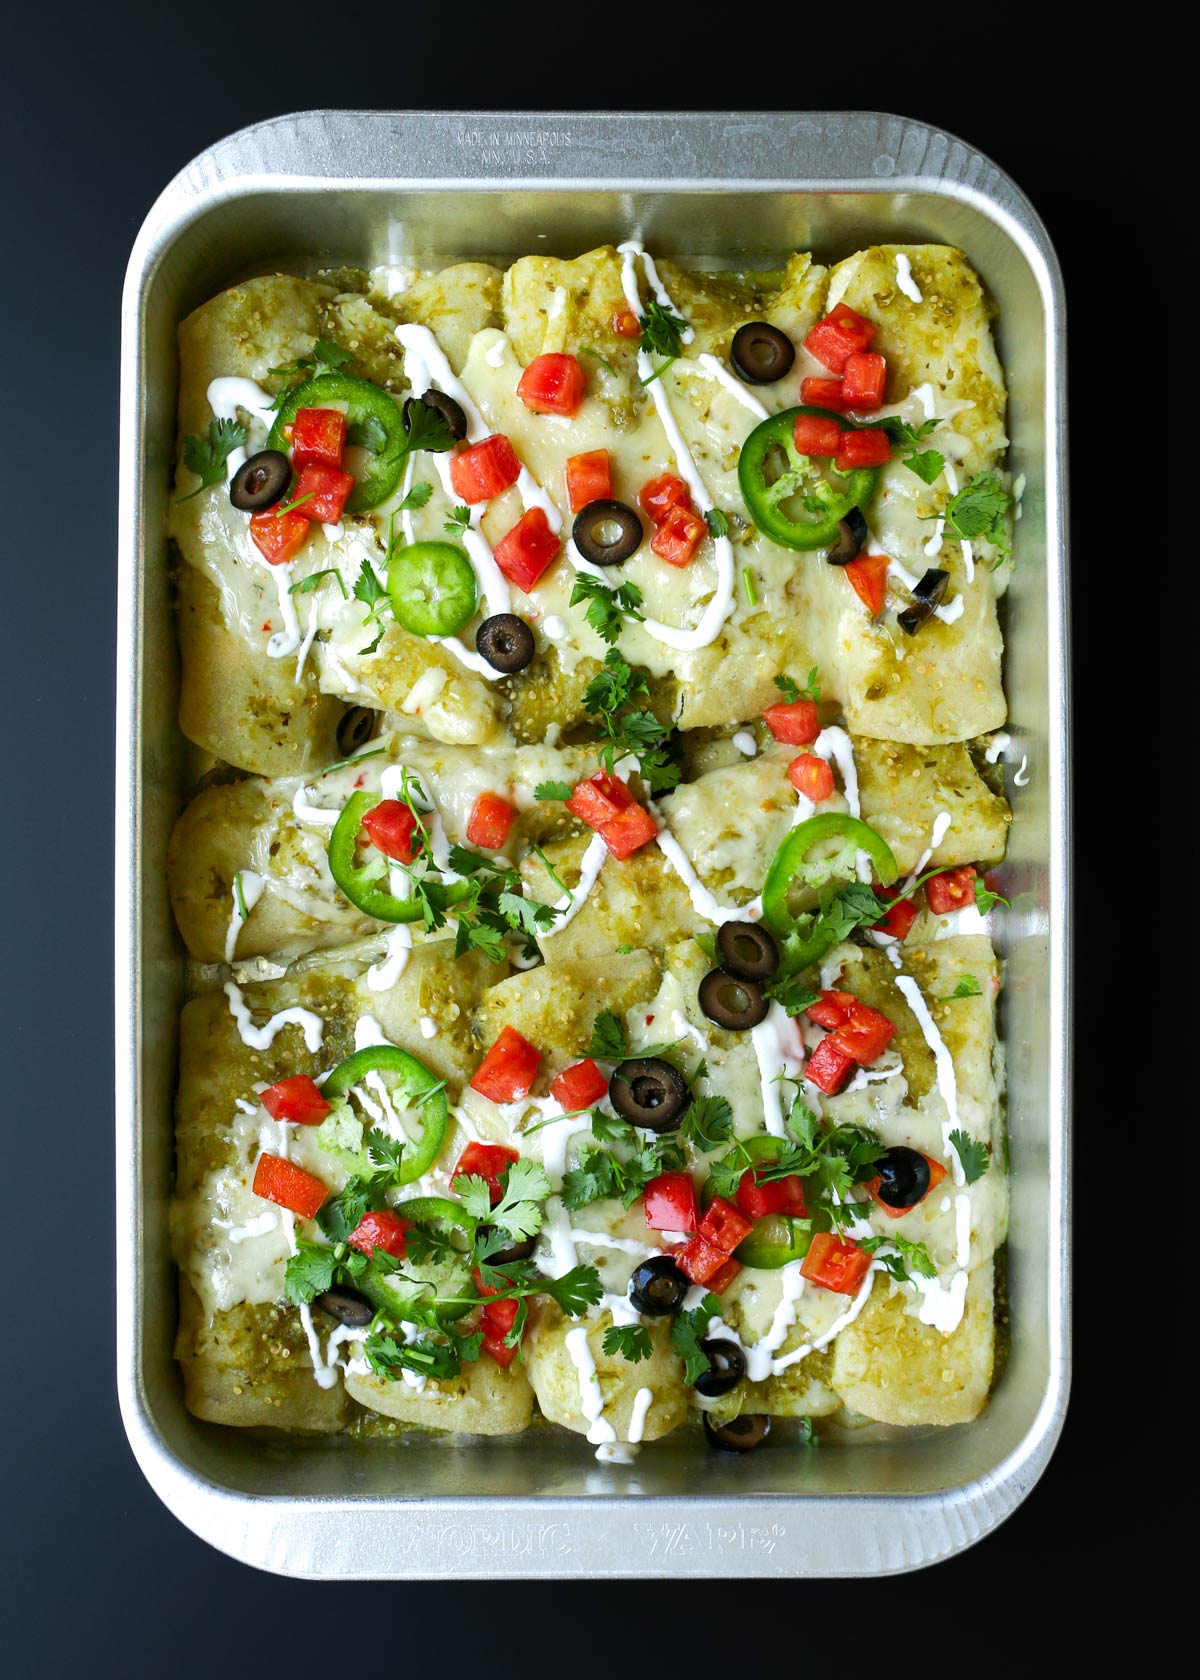 baked enchiladas topped with tomatoes, jalapenos, cilantro, and olives.